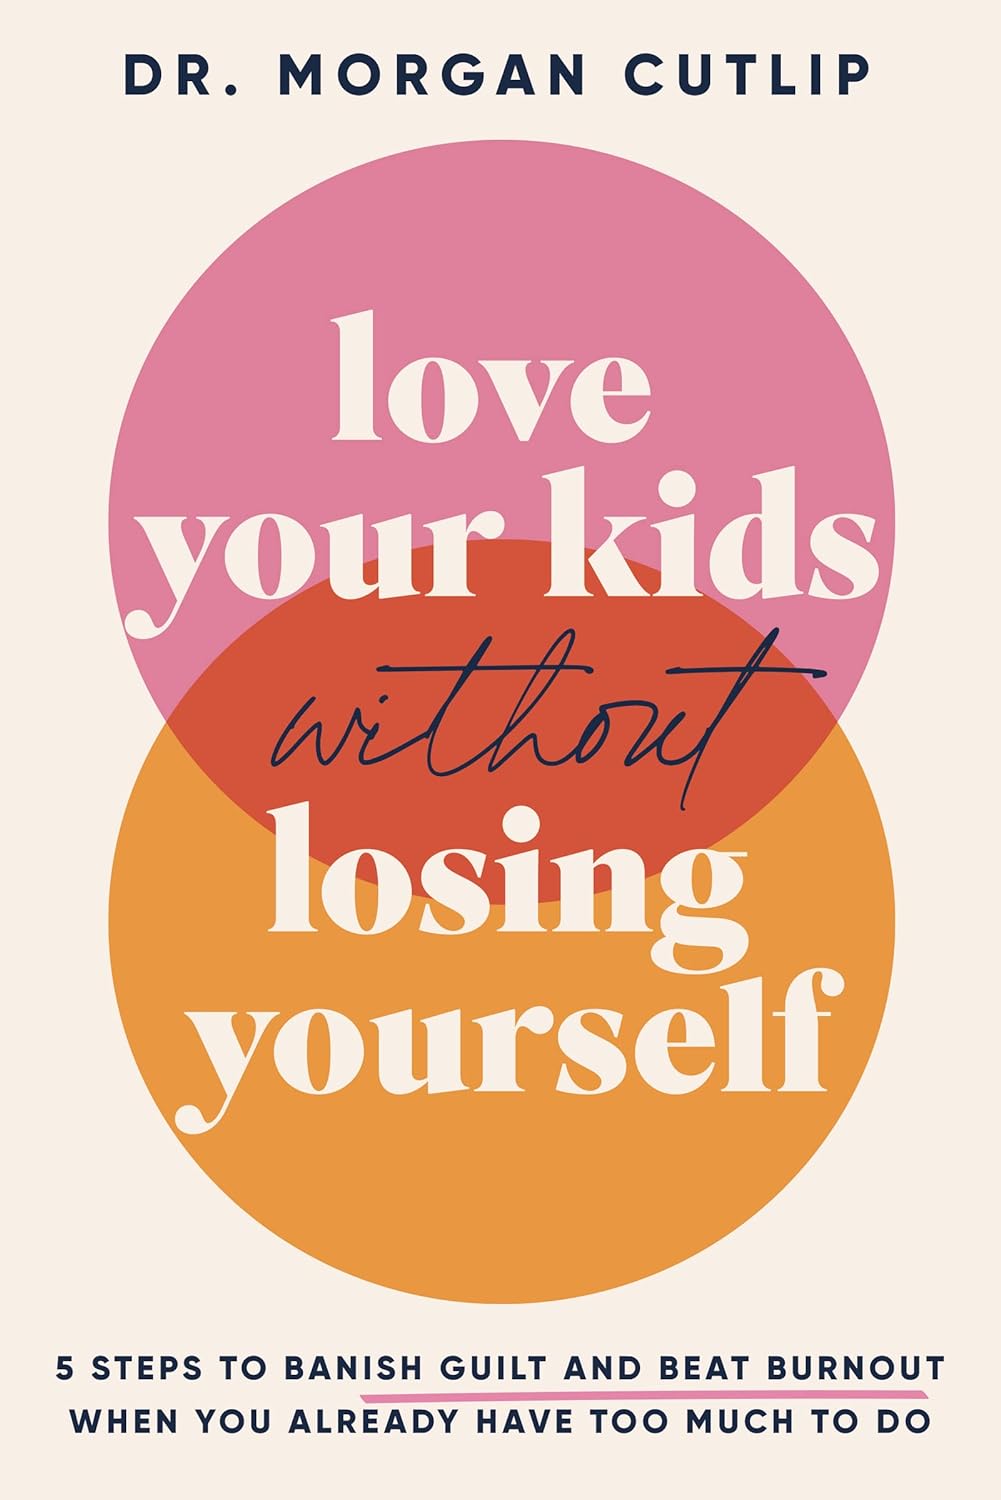 One of our recommended books is Love Your Kids Without Losing Yourself by Dr. Morgan Cutlip